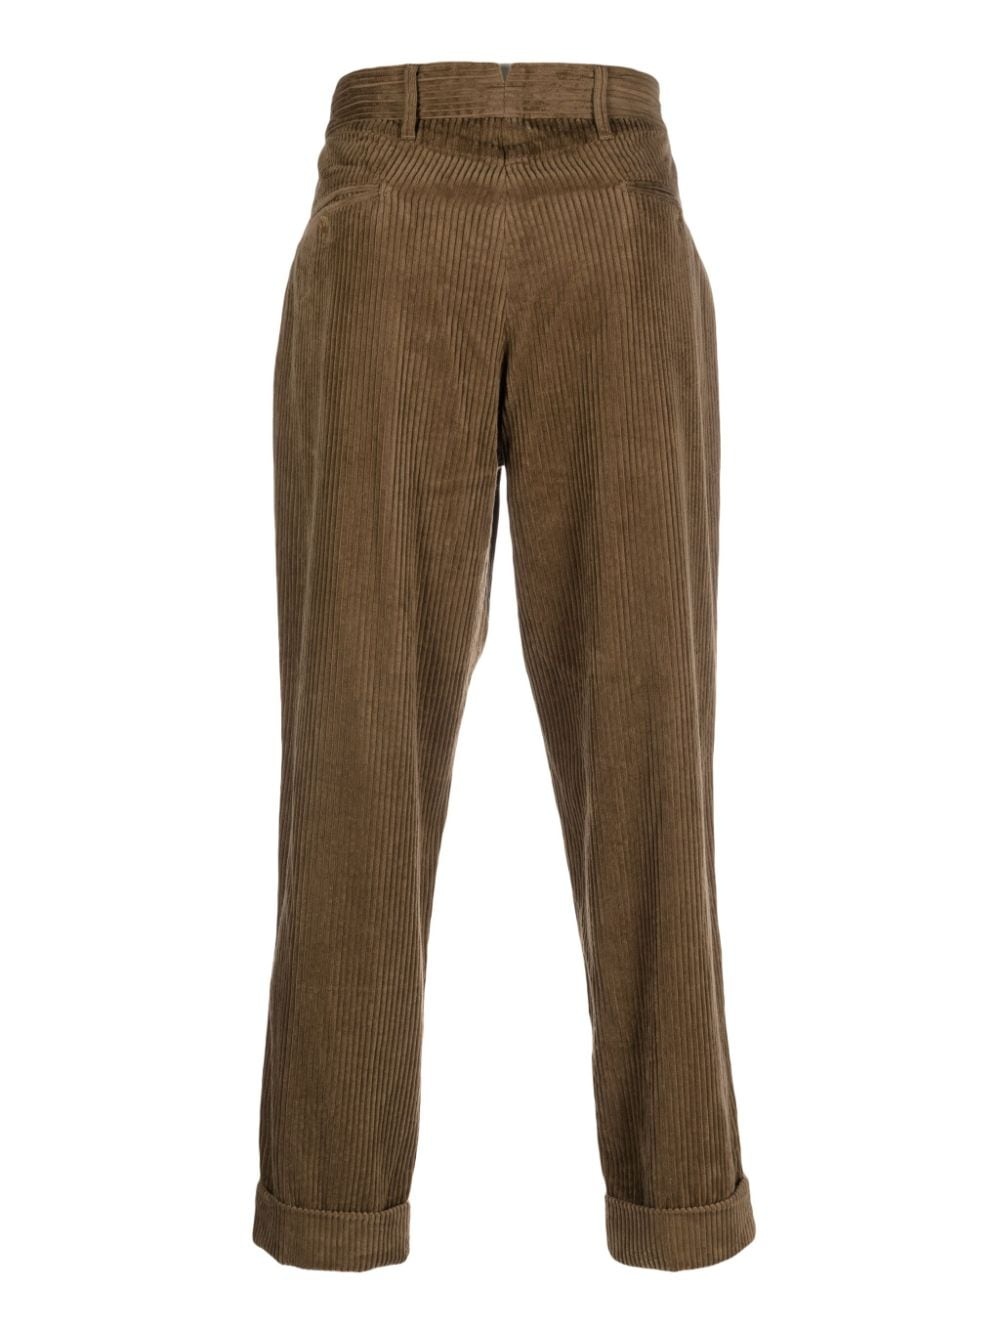 Andover corduroy trousers - 2